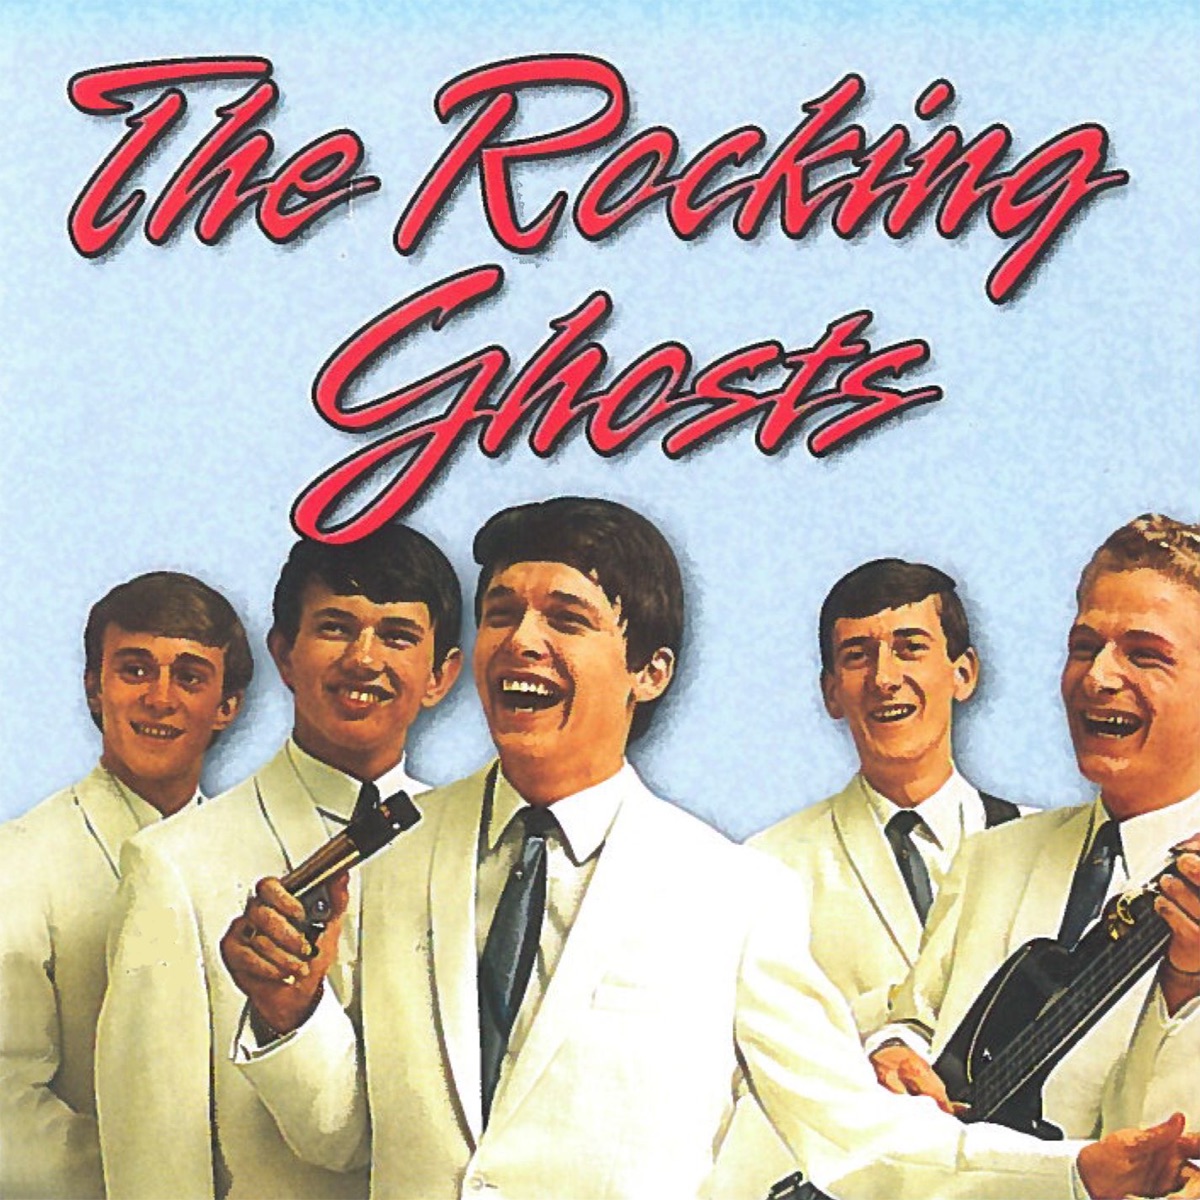 Simon Says - Single - Album by The Rocking Ghosts - Apple Music